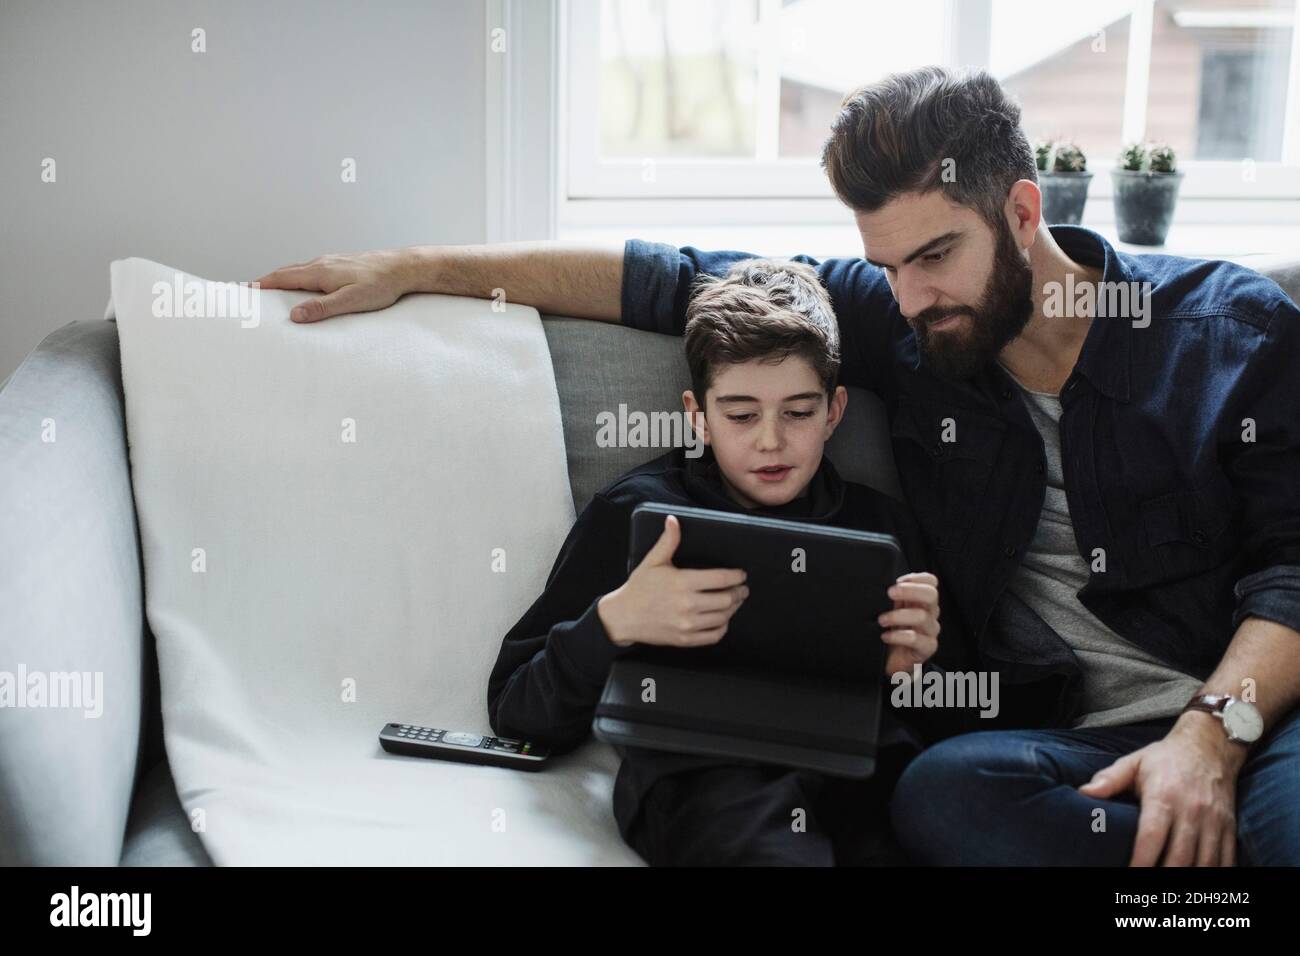 Father looking at boy using digital tablet while sitting on sofa in living room Stock Photo